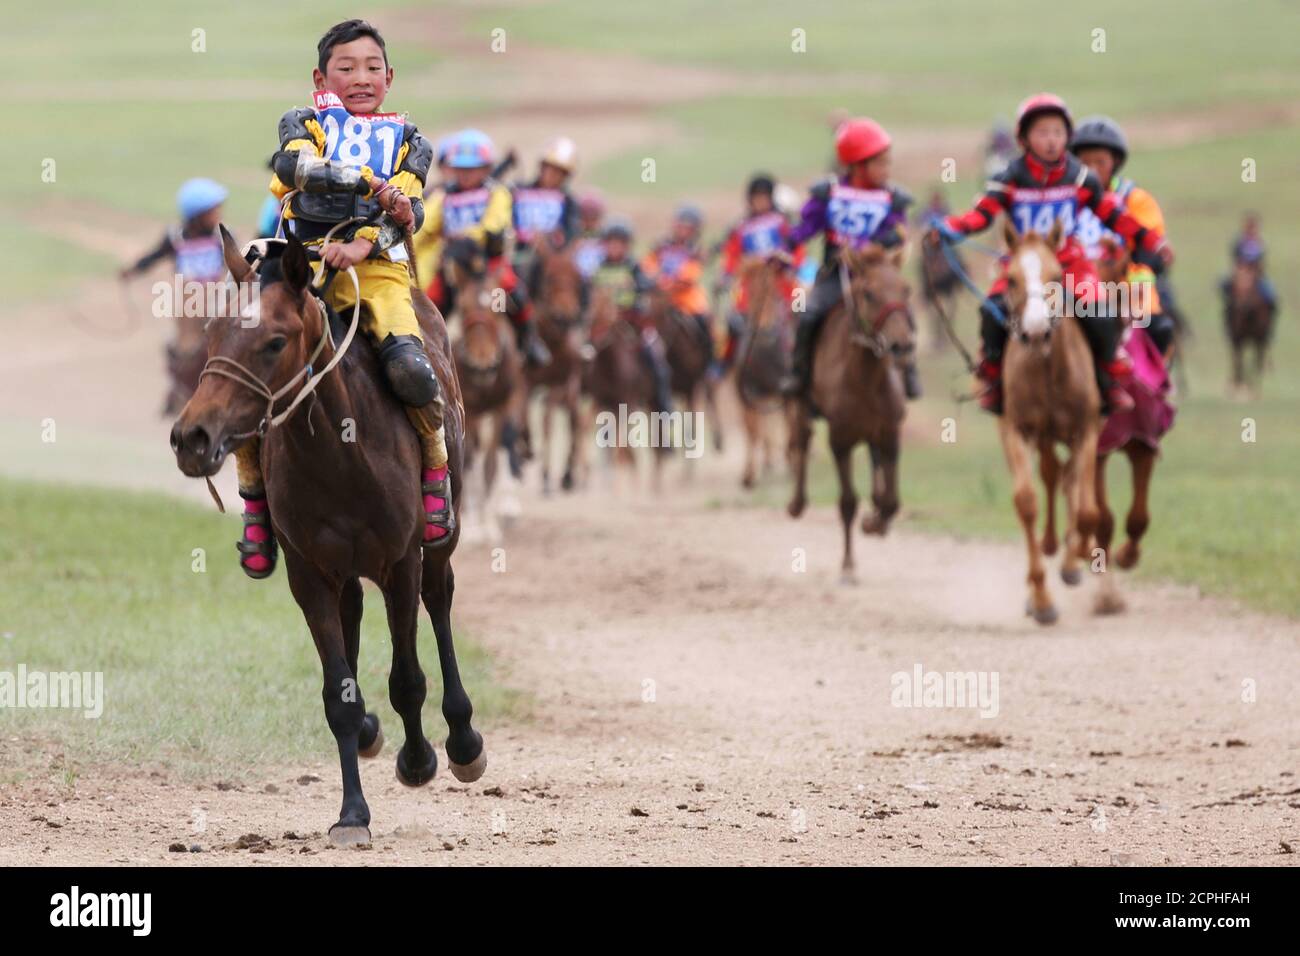 Race Finish Line During High Resolution Stock Photography and Images - Alamy